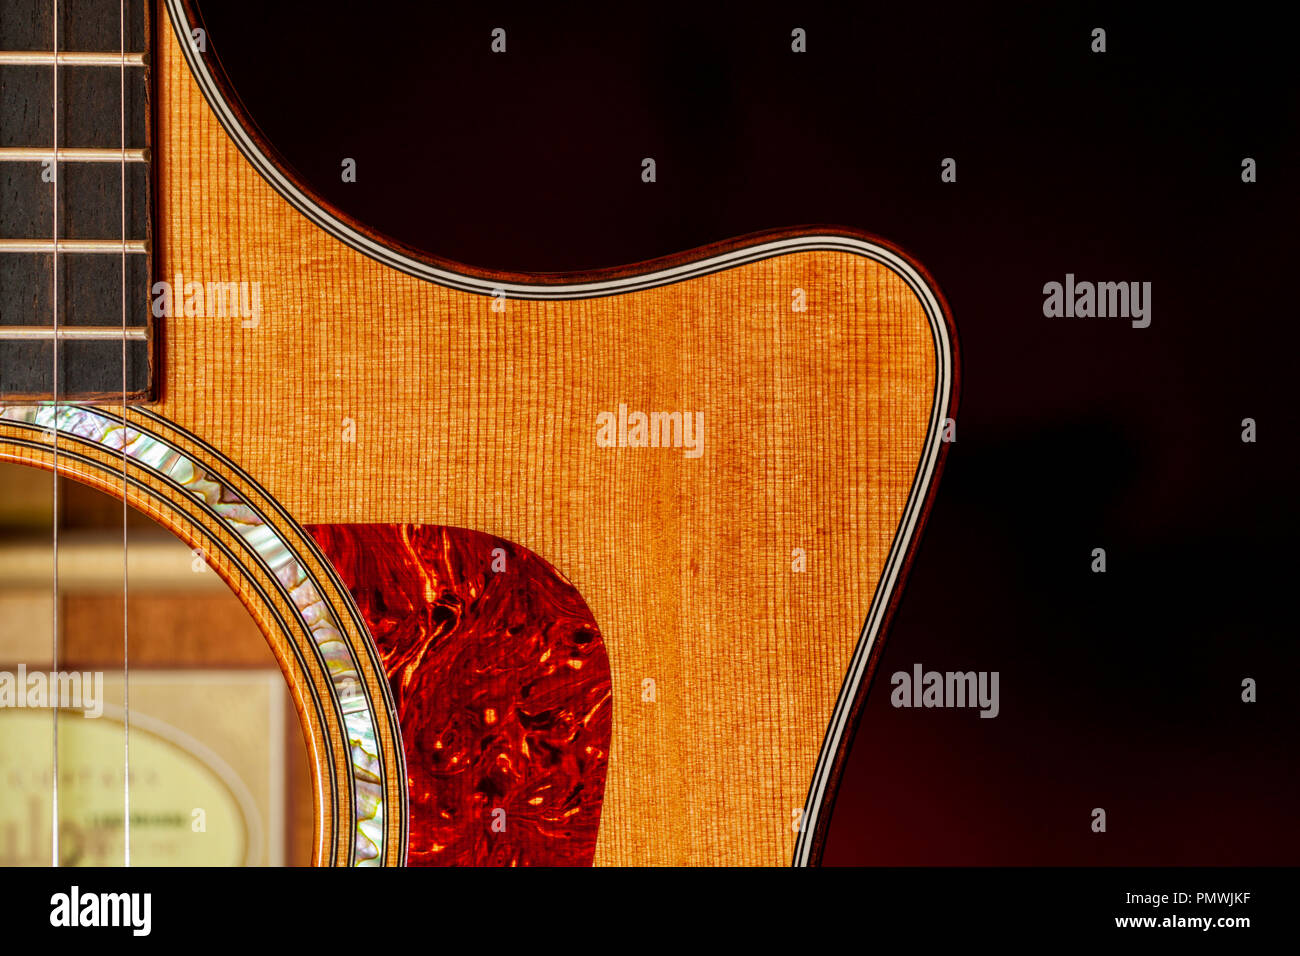 Close-up of an Acoustic Guitar and Strings Stock Photo